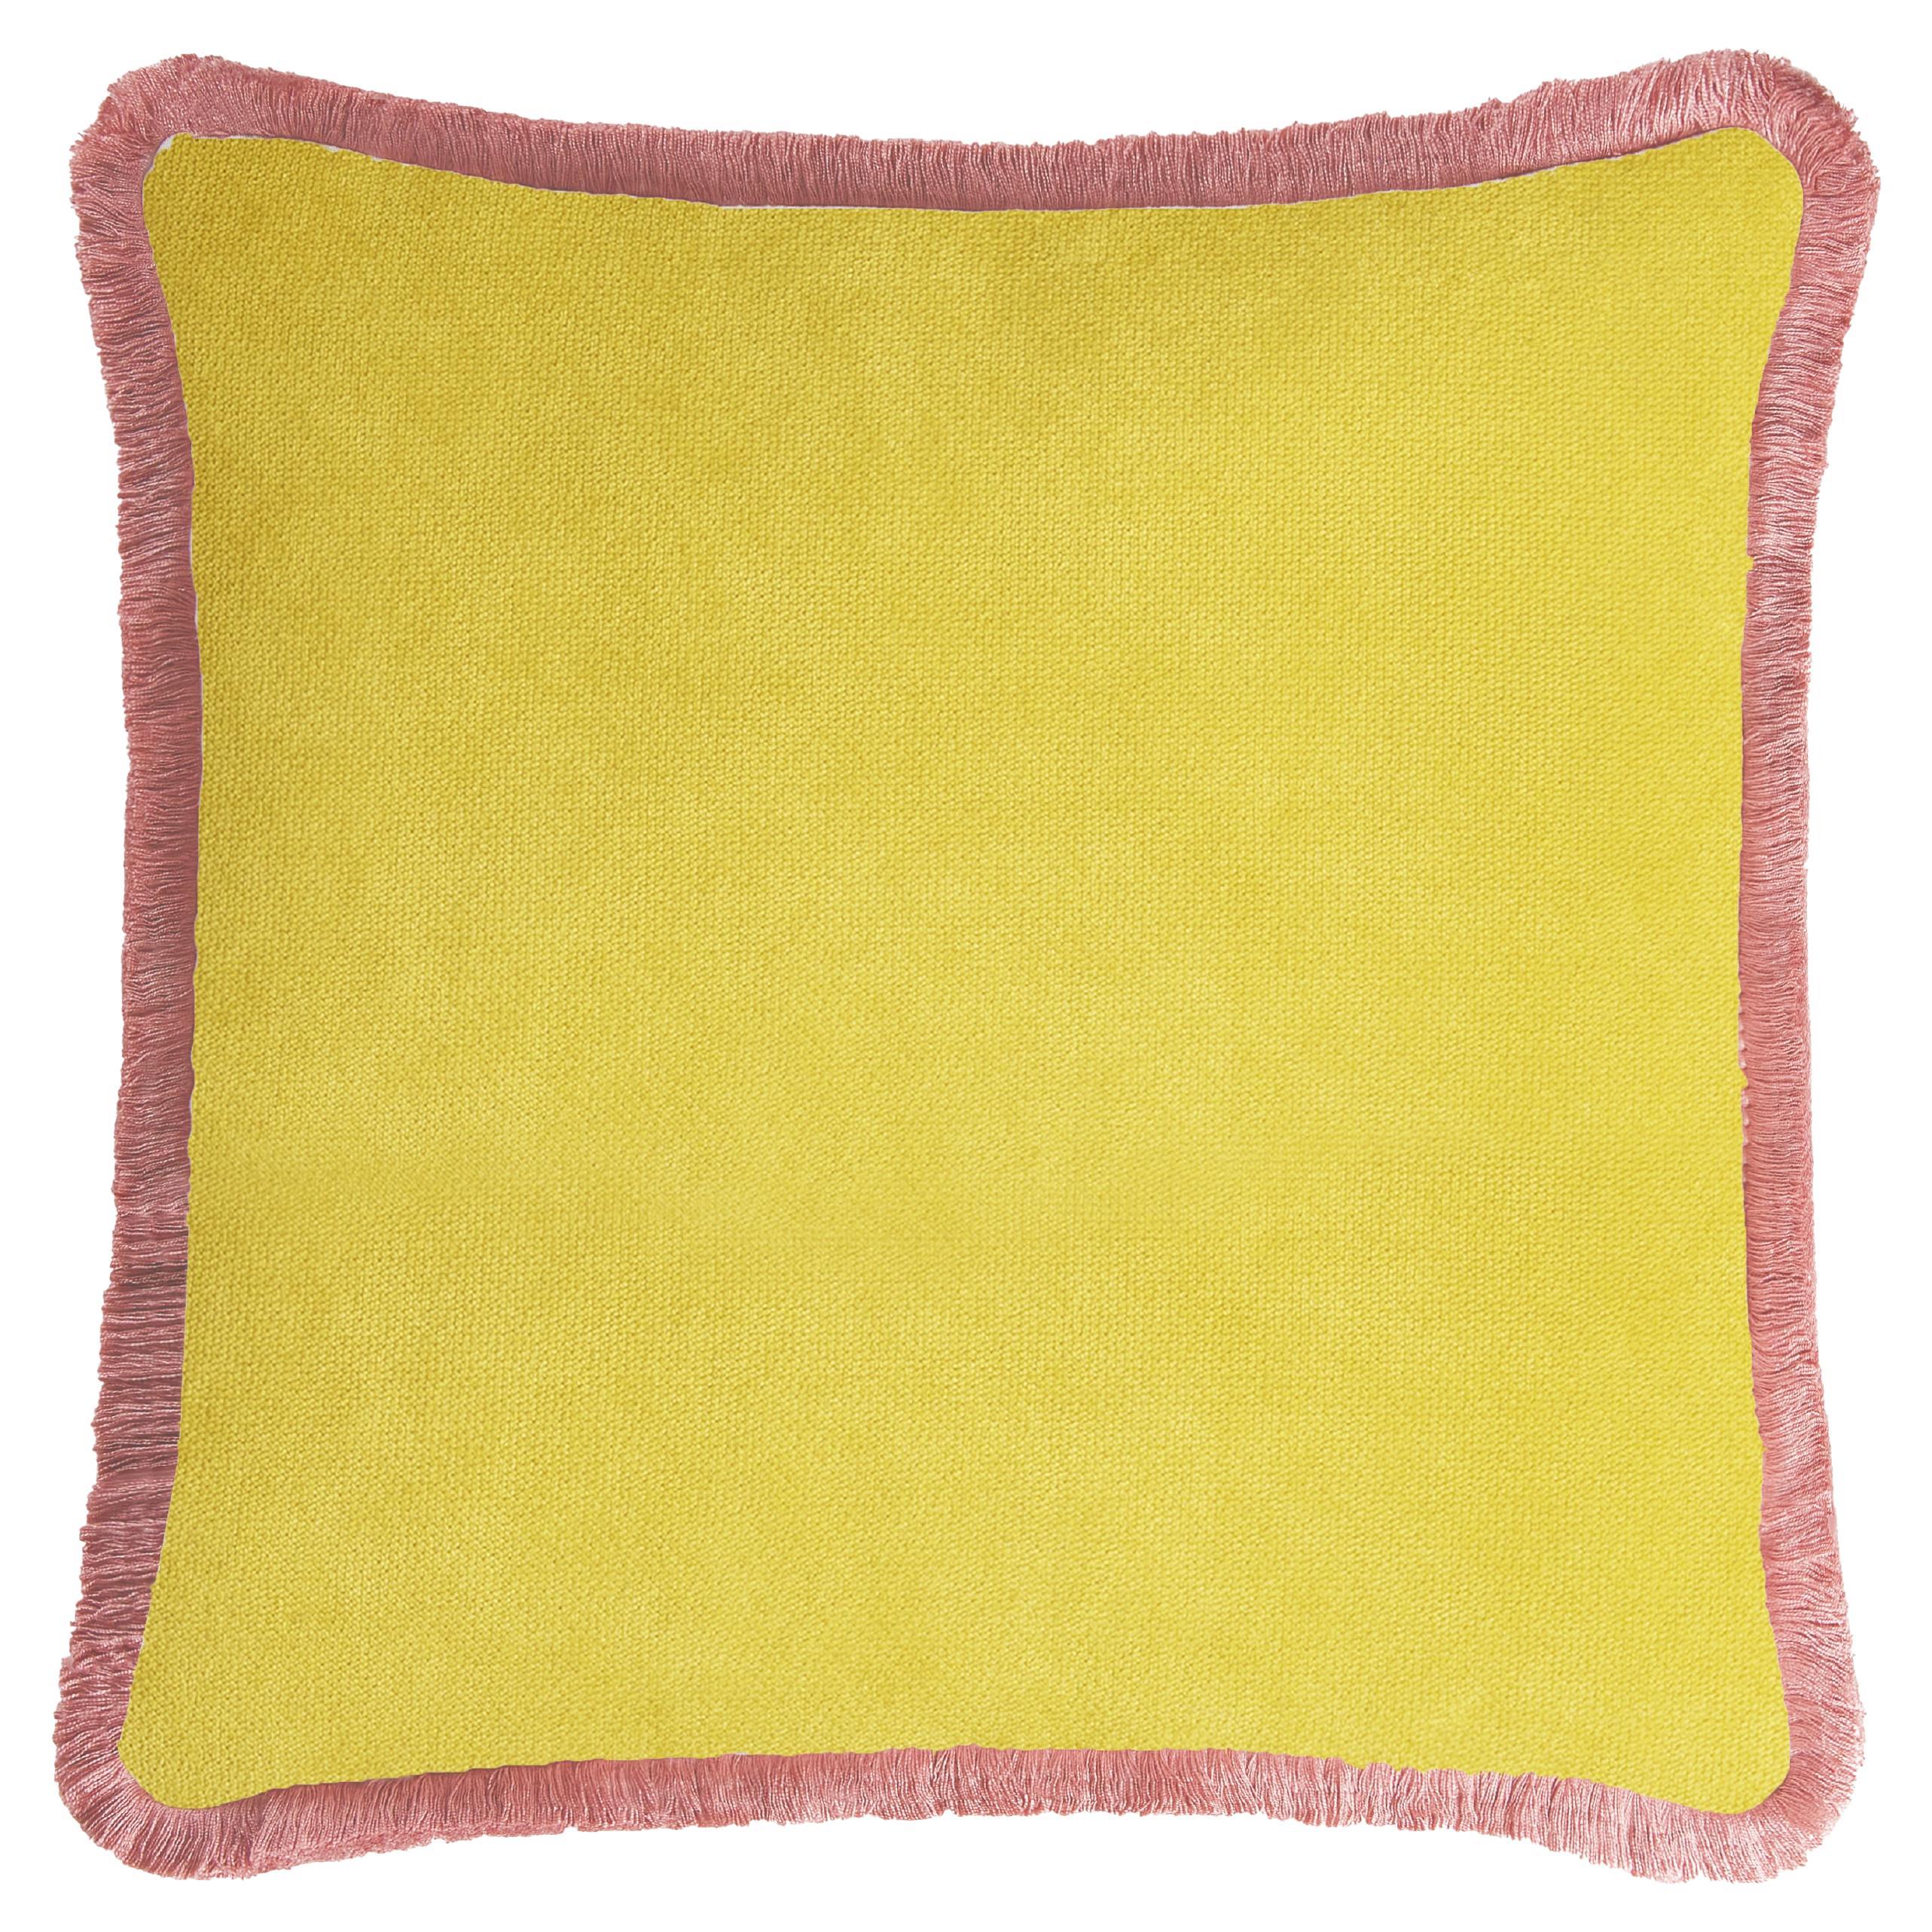 HAPPY PILLOW 40 Velvet Yellow with Pink Fringes For Sale